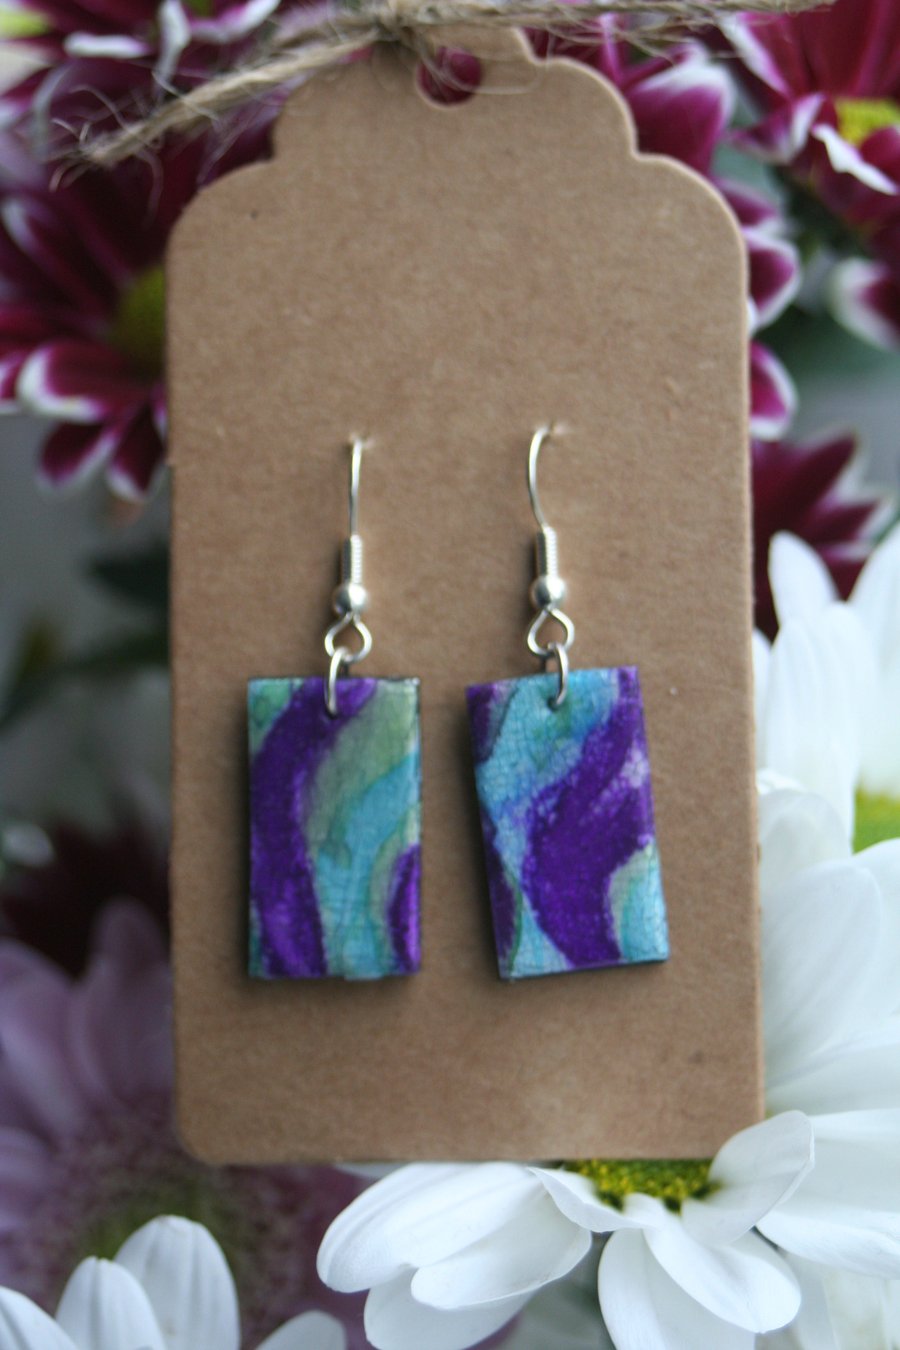 Green and purple polymer clay rectangular earrings